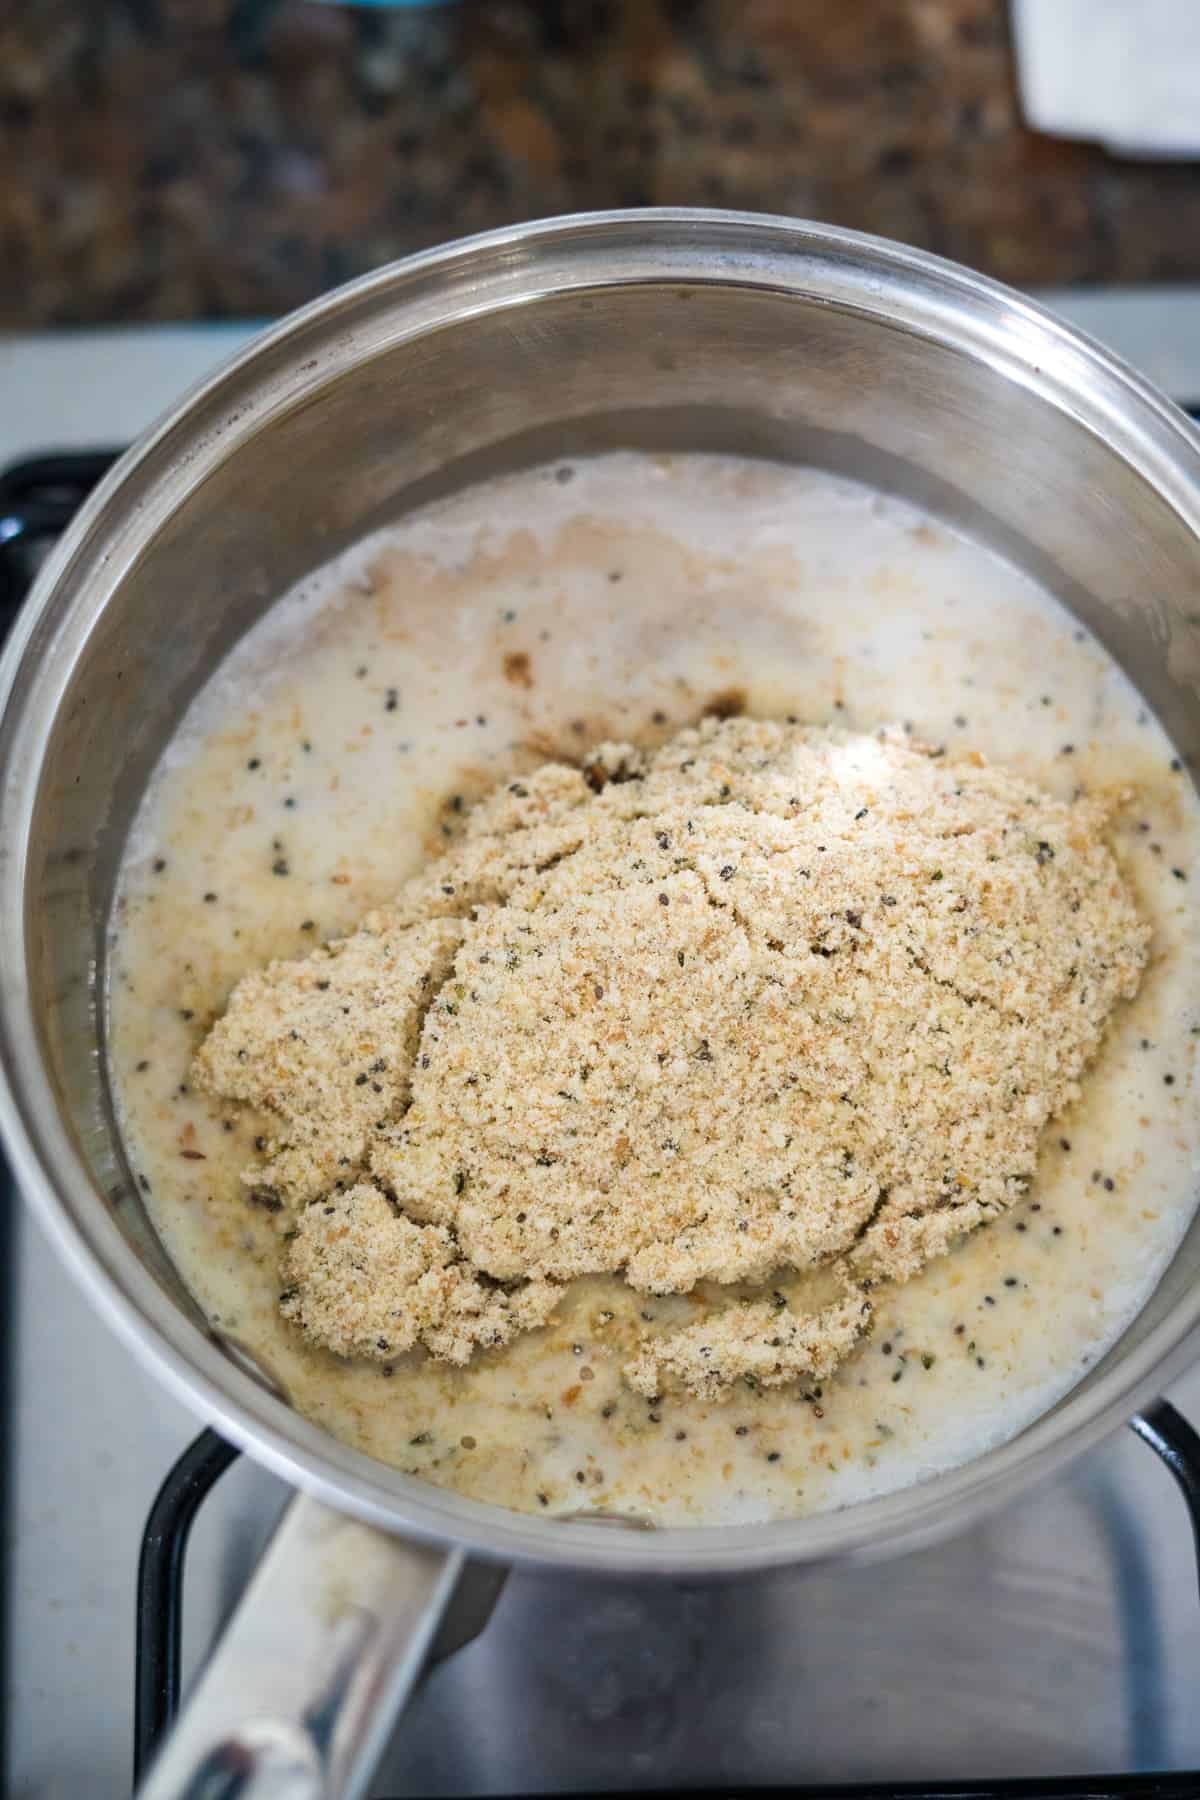 A pan with a protein porridge mixture in it on top of a stove.